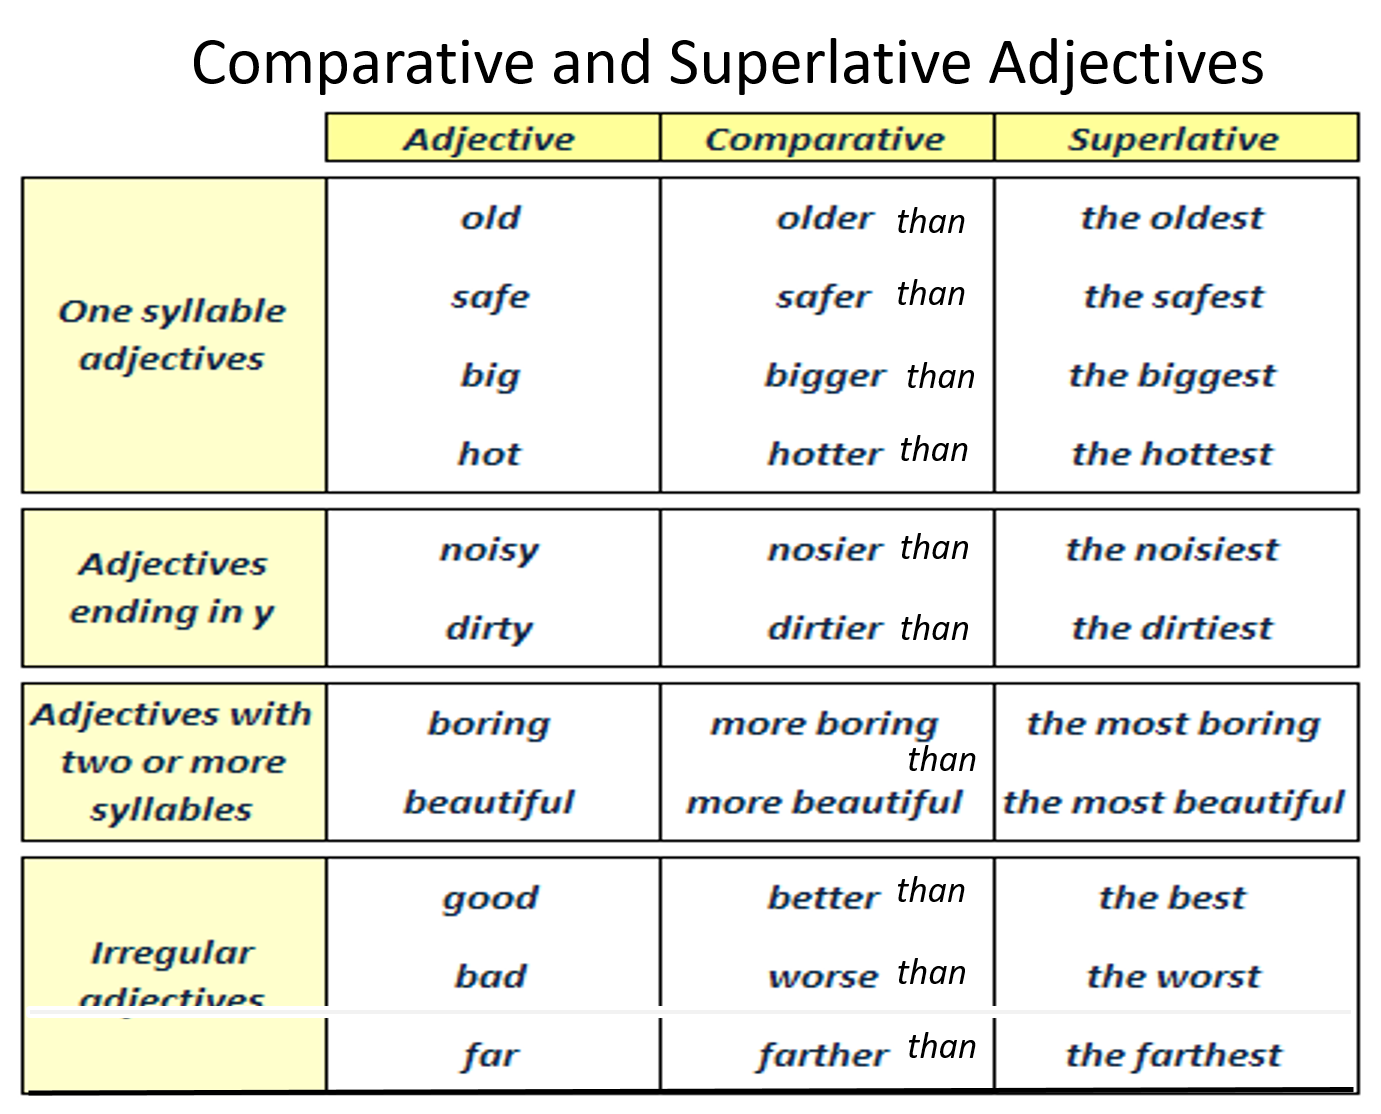 Adjectives rules. Comparatives and Superlatives правило таблица. Comparative adjectives таблица. Таблица Comparative and Superlative. Comparatives and Superlatives правило.